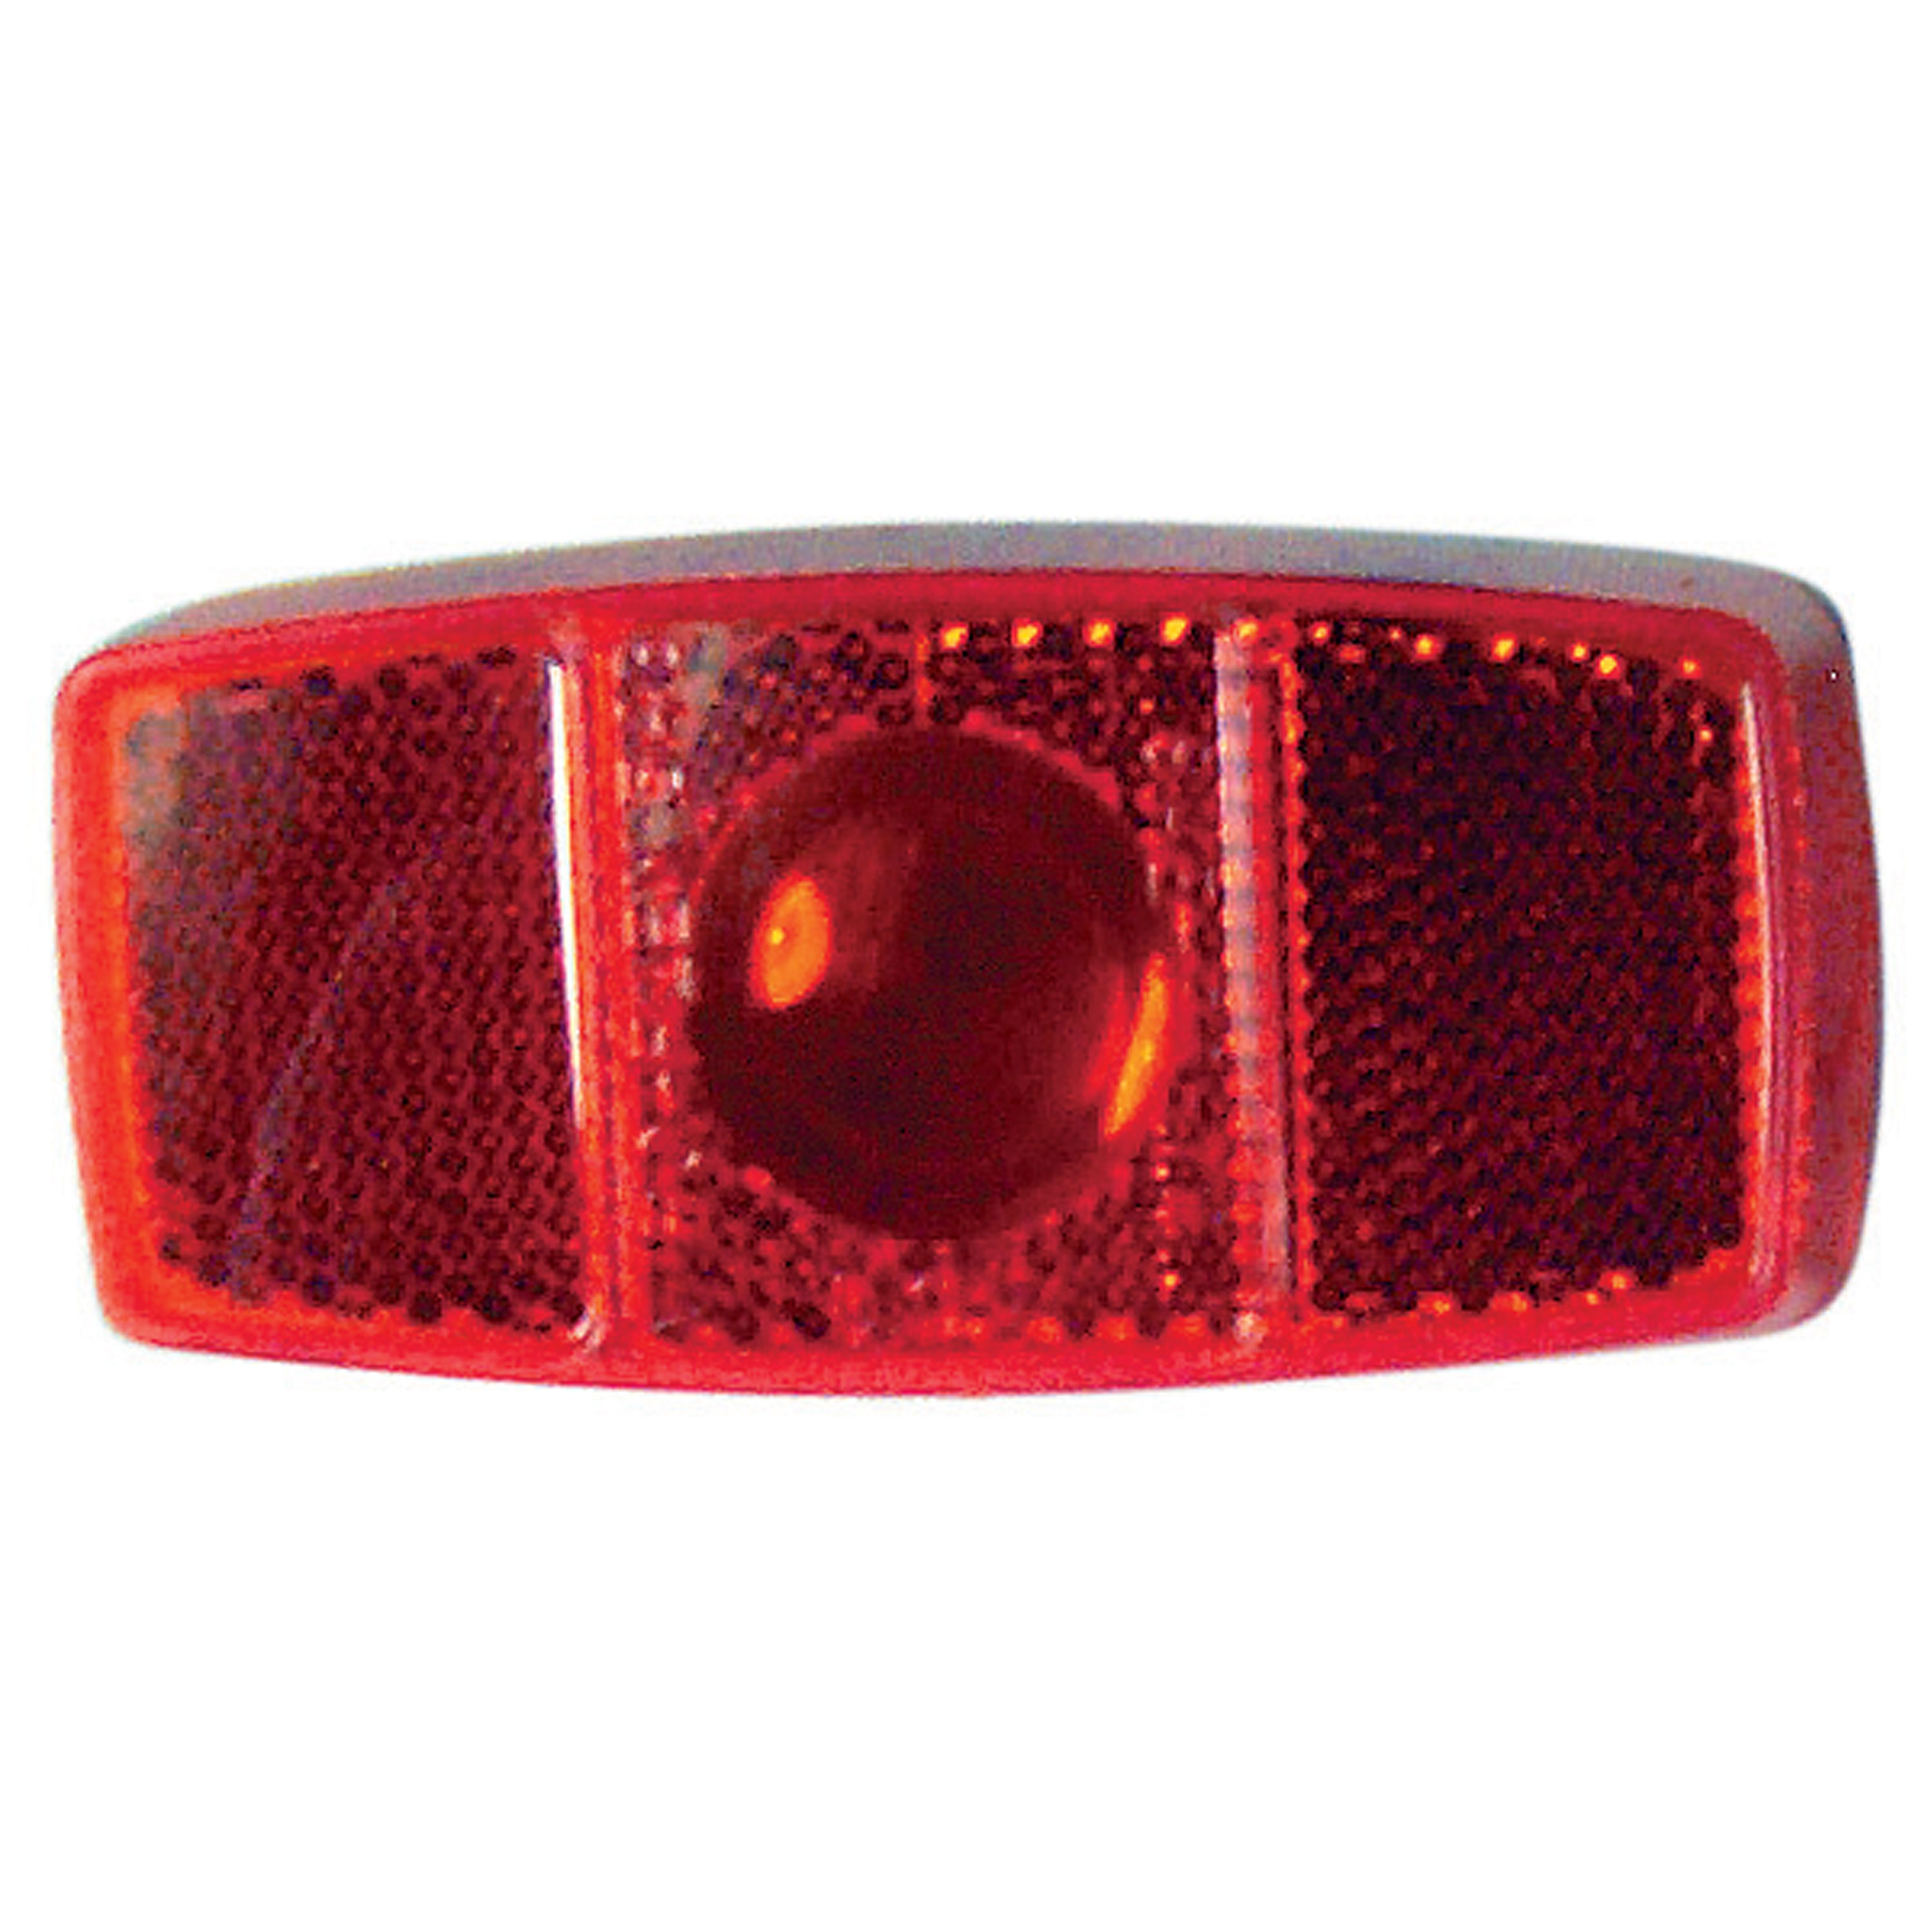 0407.1003 No.349 Clearance Light, Red - 4 X 2 X 1 In.